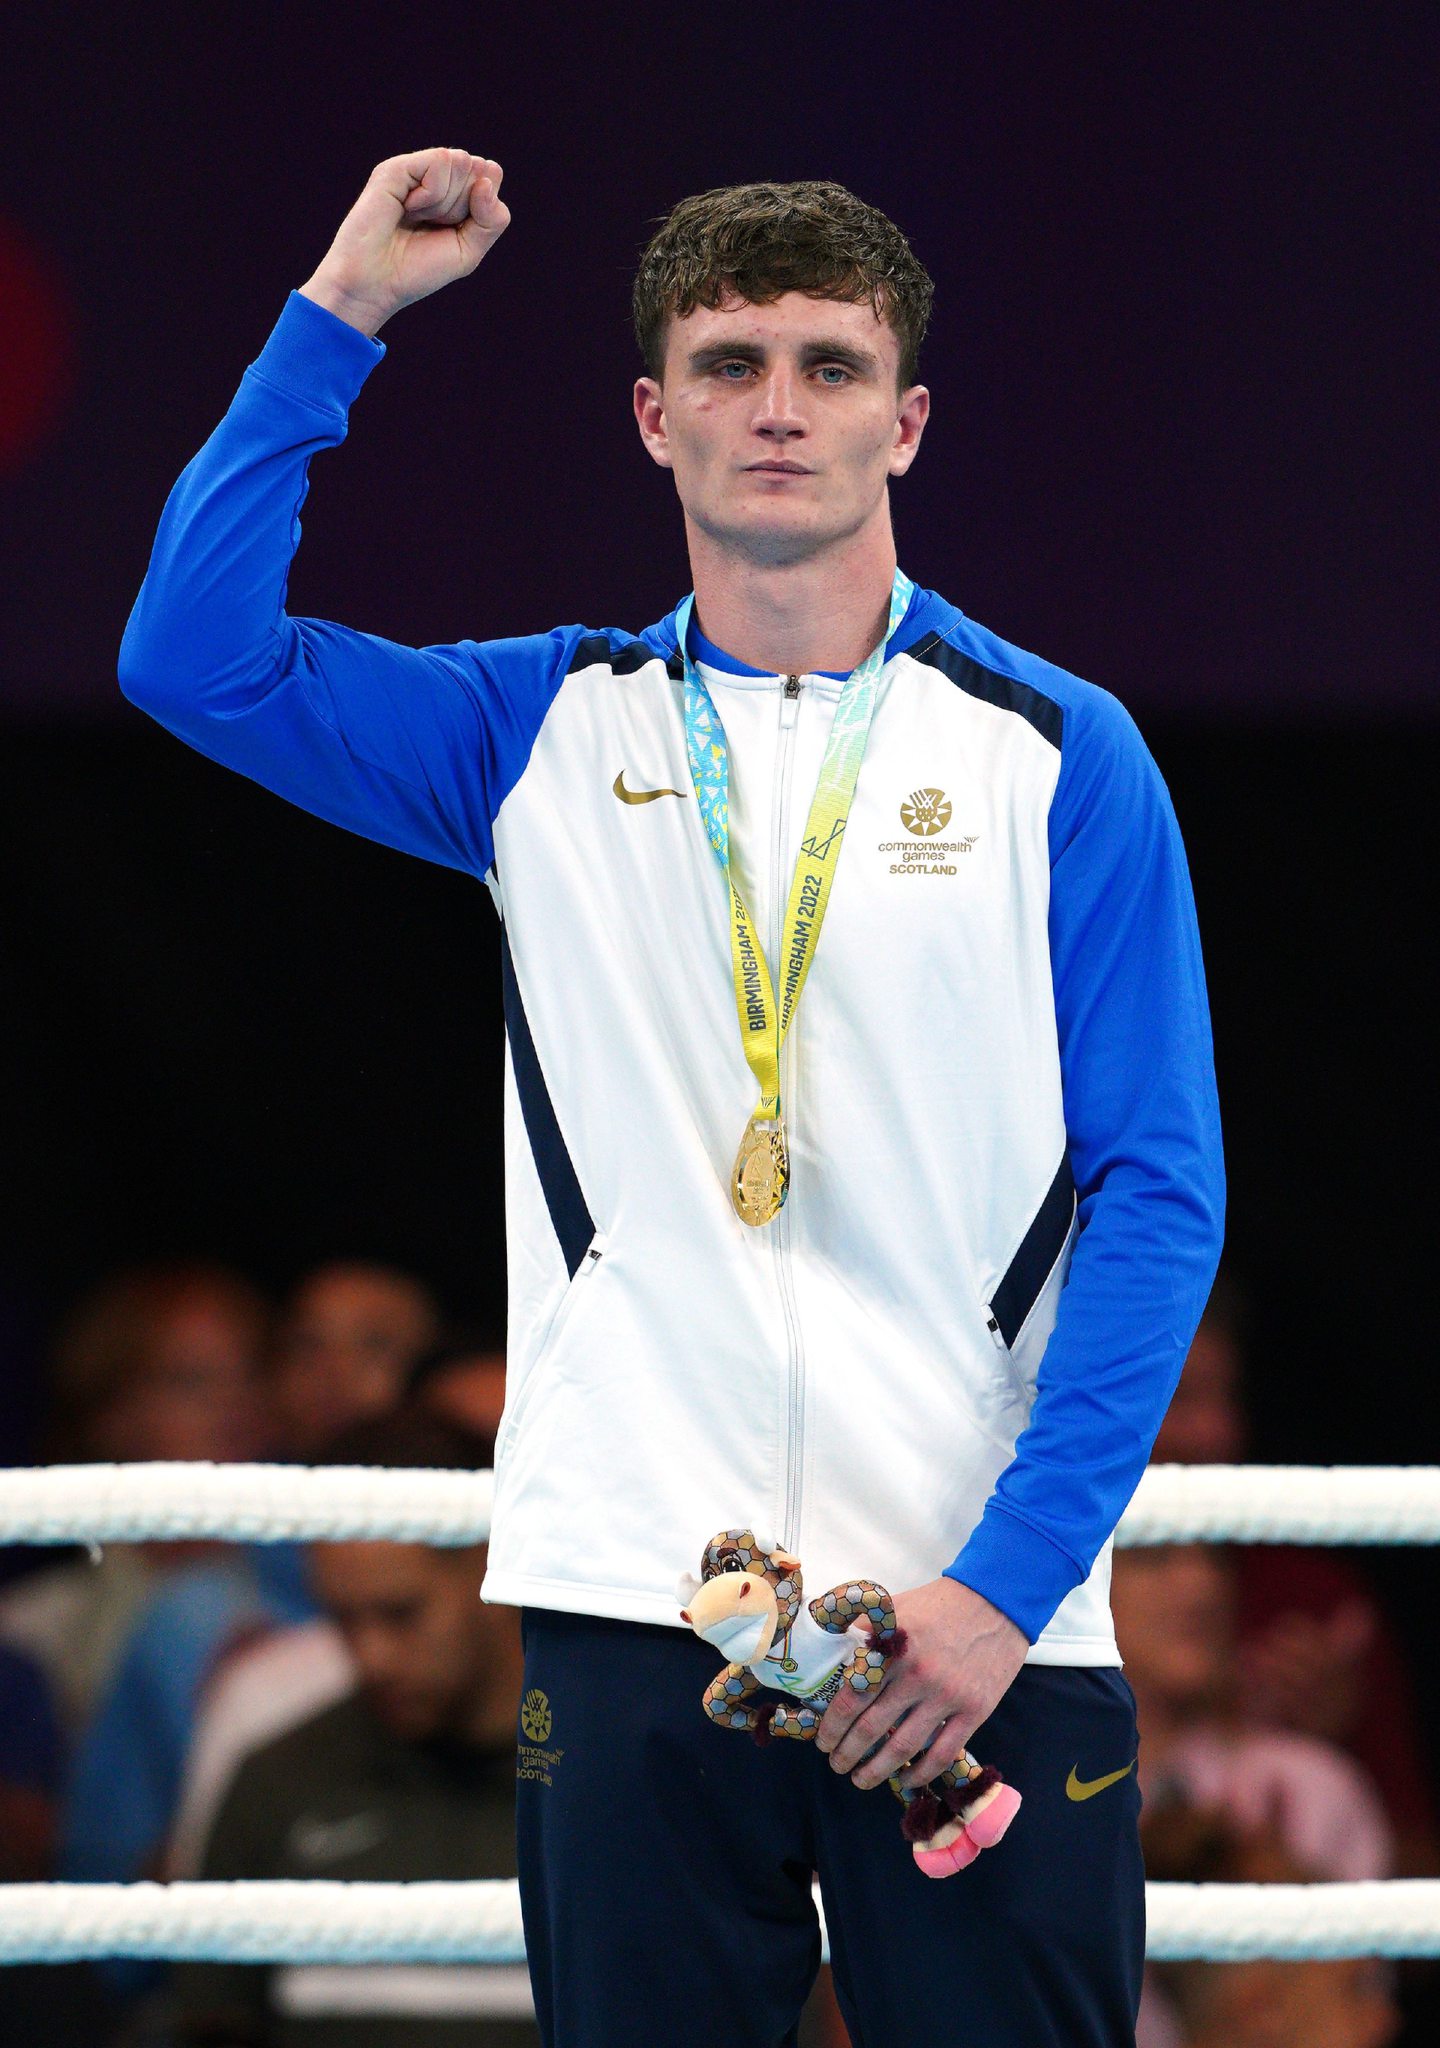 Scotland's Sam Hickey wins gold and follows in the footsteps of city pugilist Dick McTaggart.